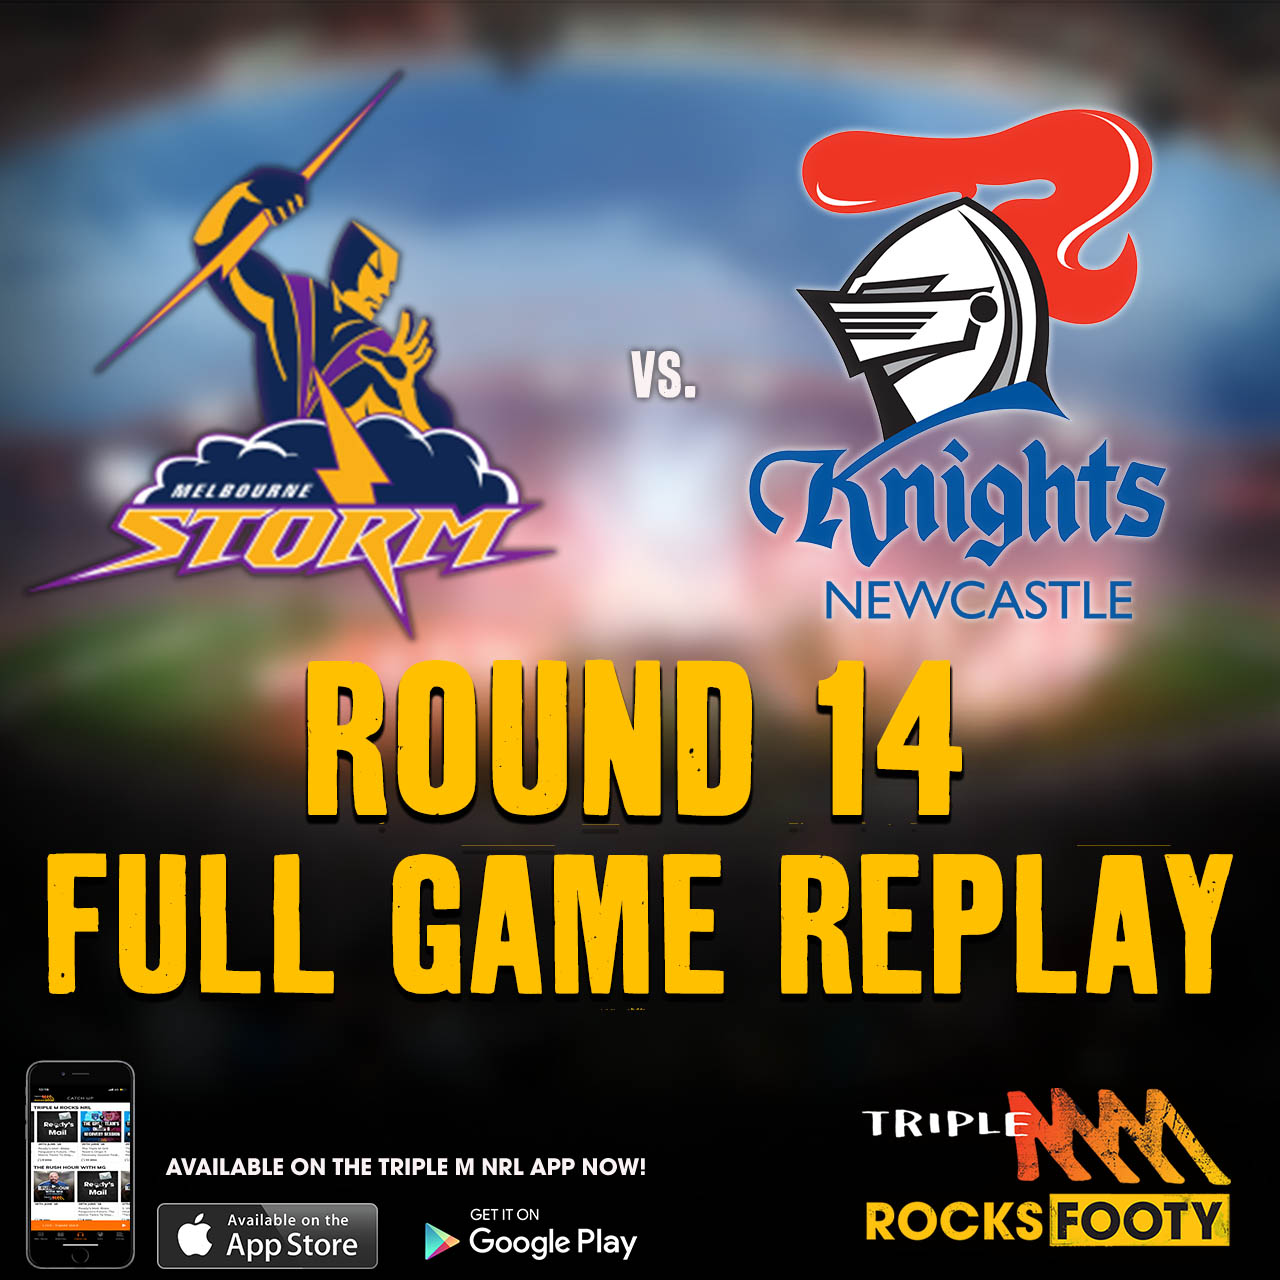 Storm vs. Knights | FULL GAME REPLAY